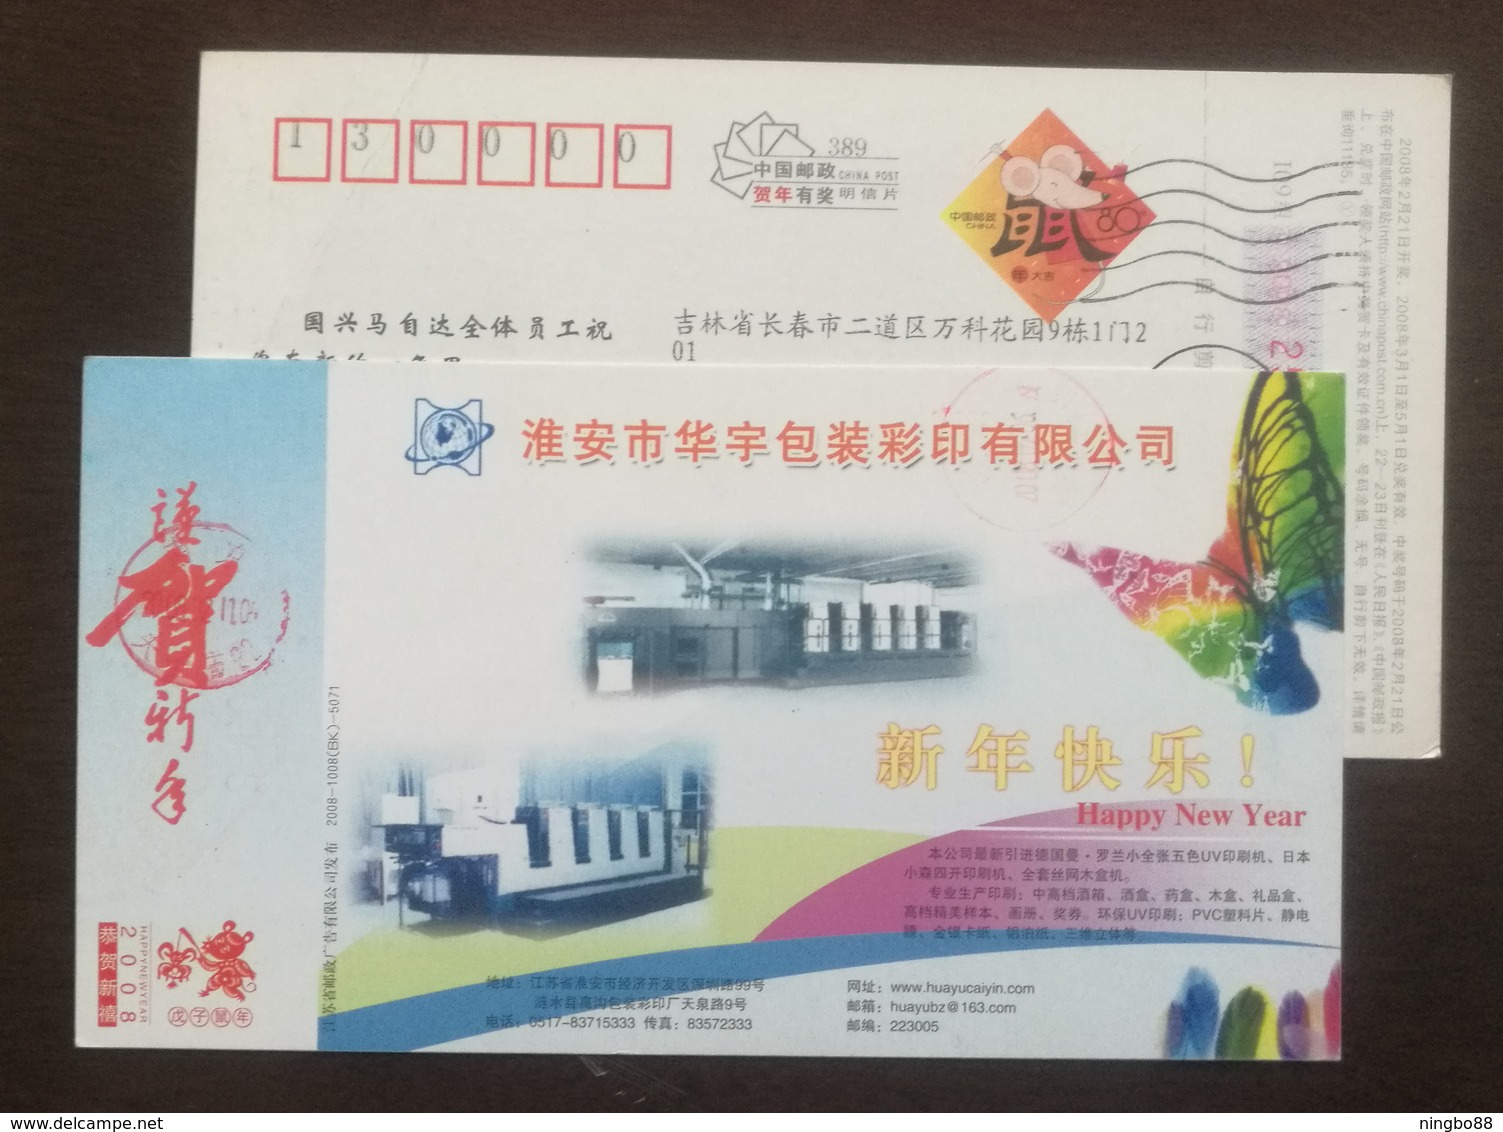 German Manroland Sheetfed Colors UV Printing Machine,Japan LITHRONE Quarter-size,CN08 Huayu Packaging Color Printing PSC - Factories & Industries